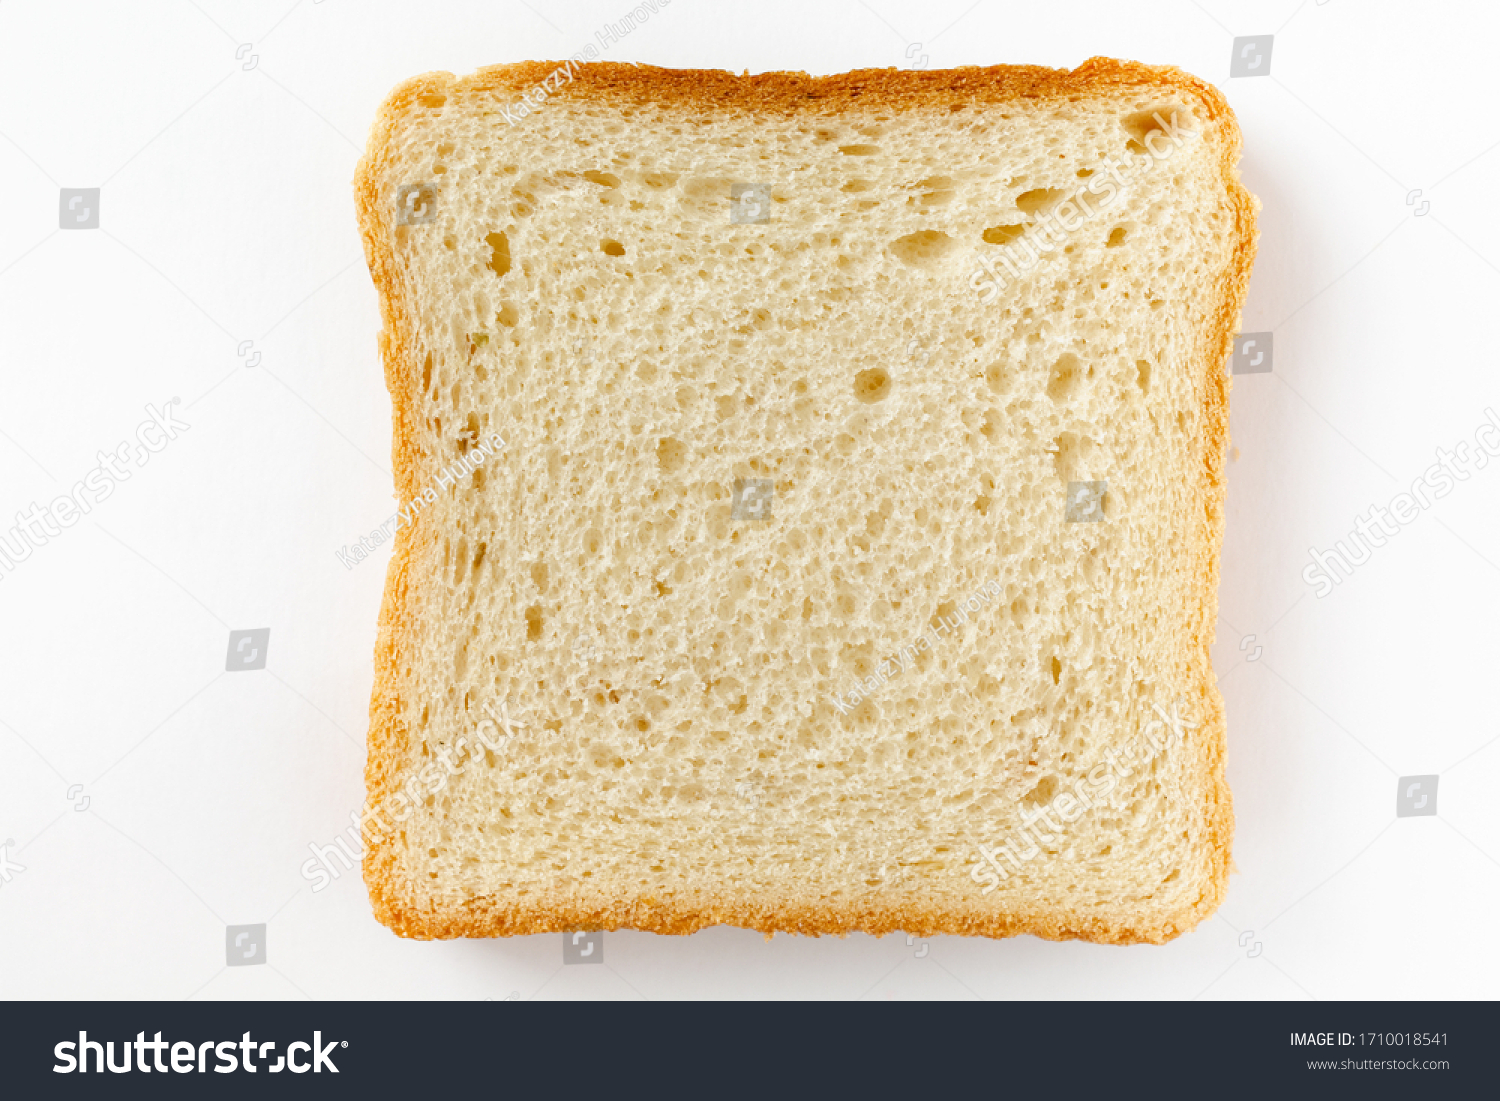 Slices toast bread isolated on white background. Top view, flat lay #1710018541